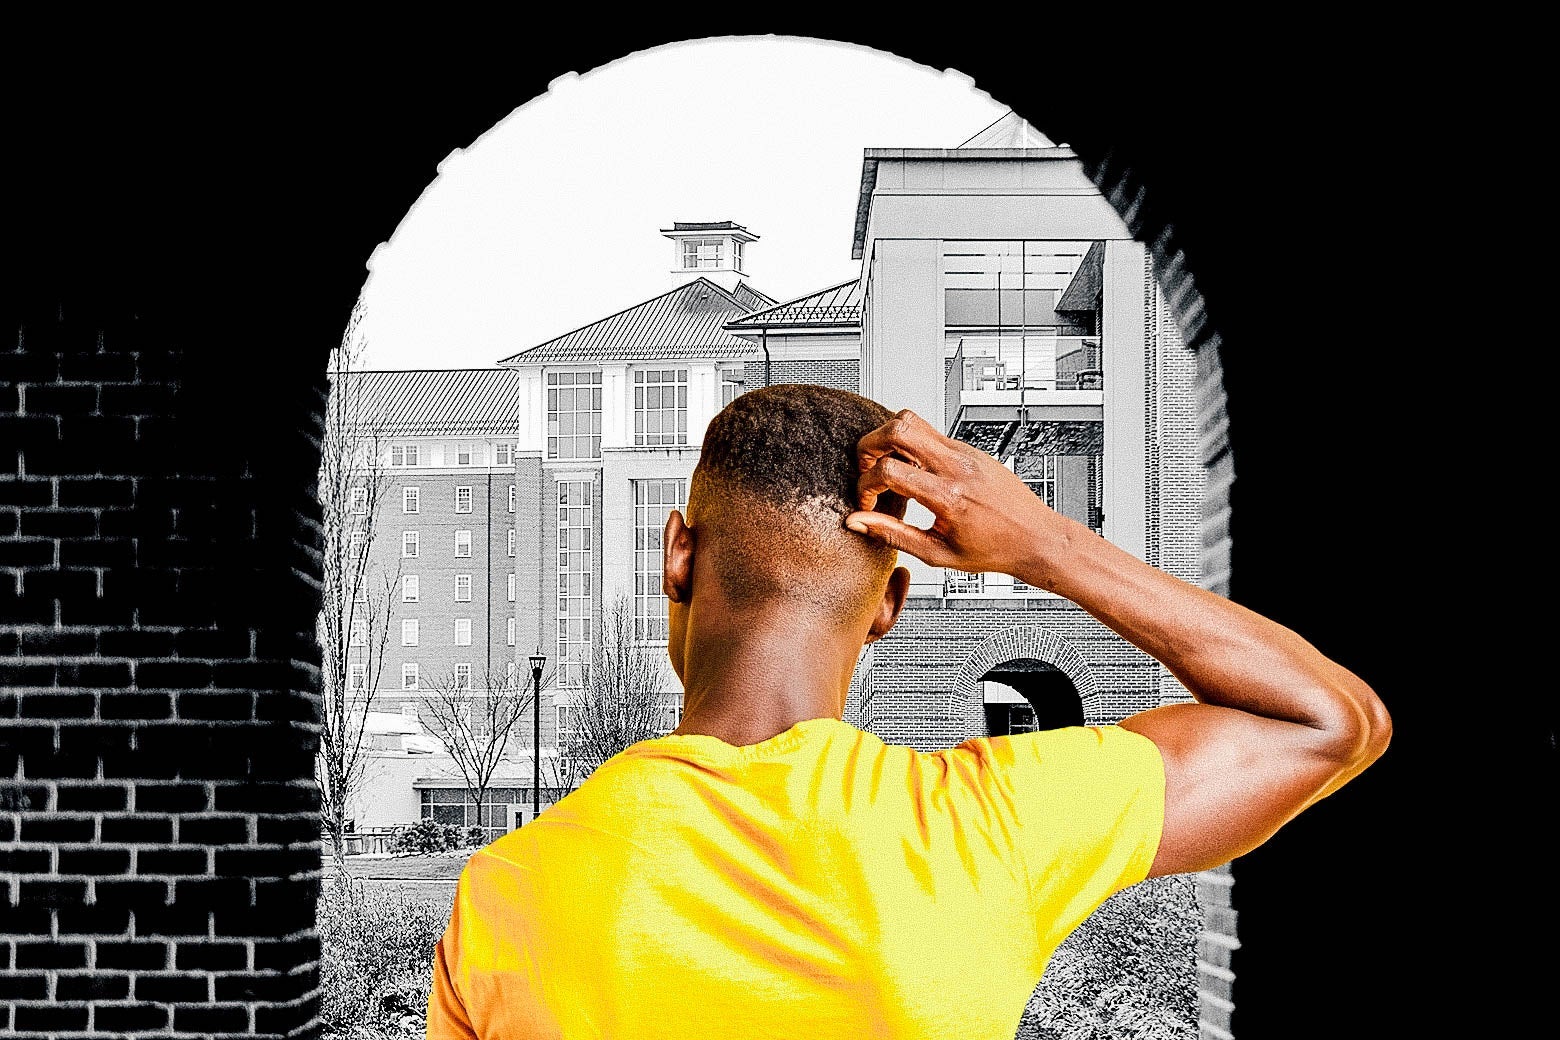 A black man, seen from behind, holds his hand to his head as he looks at campus.